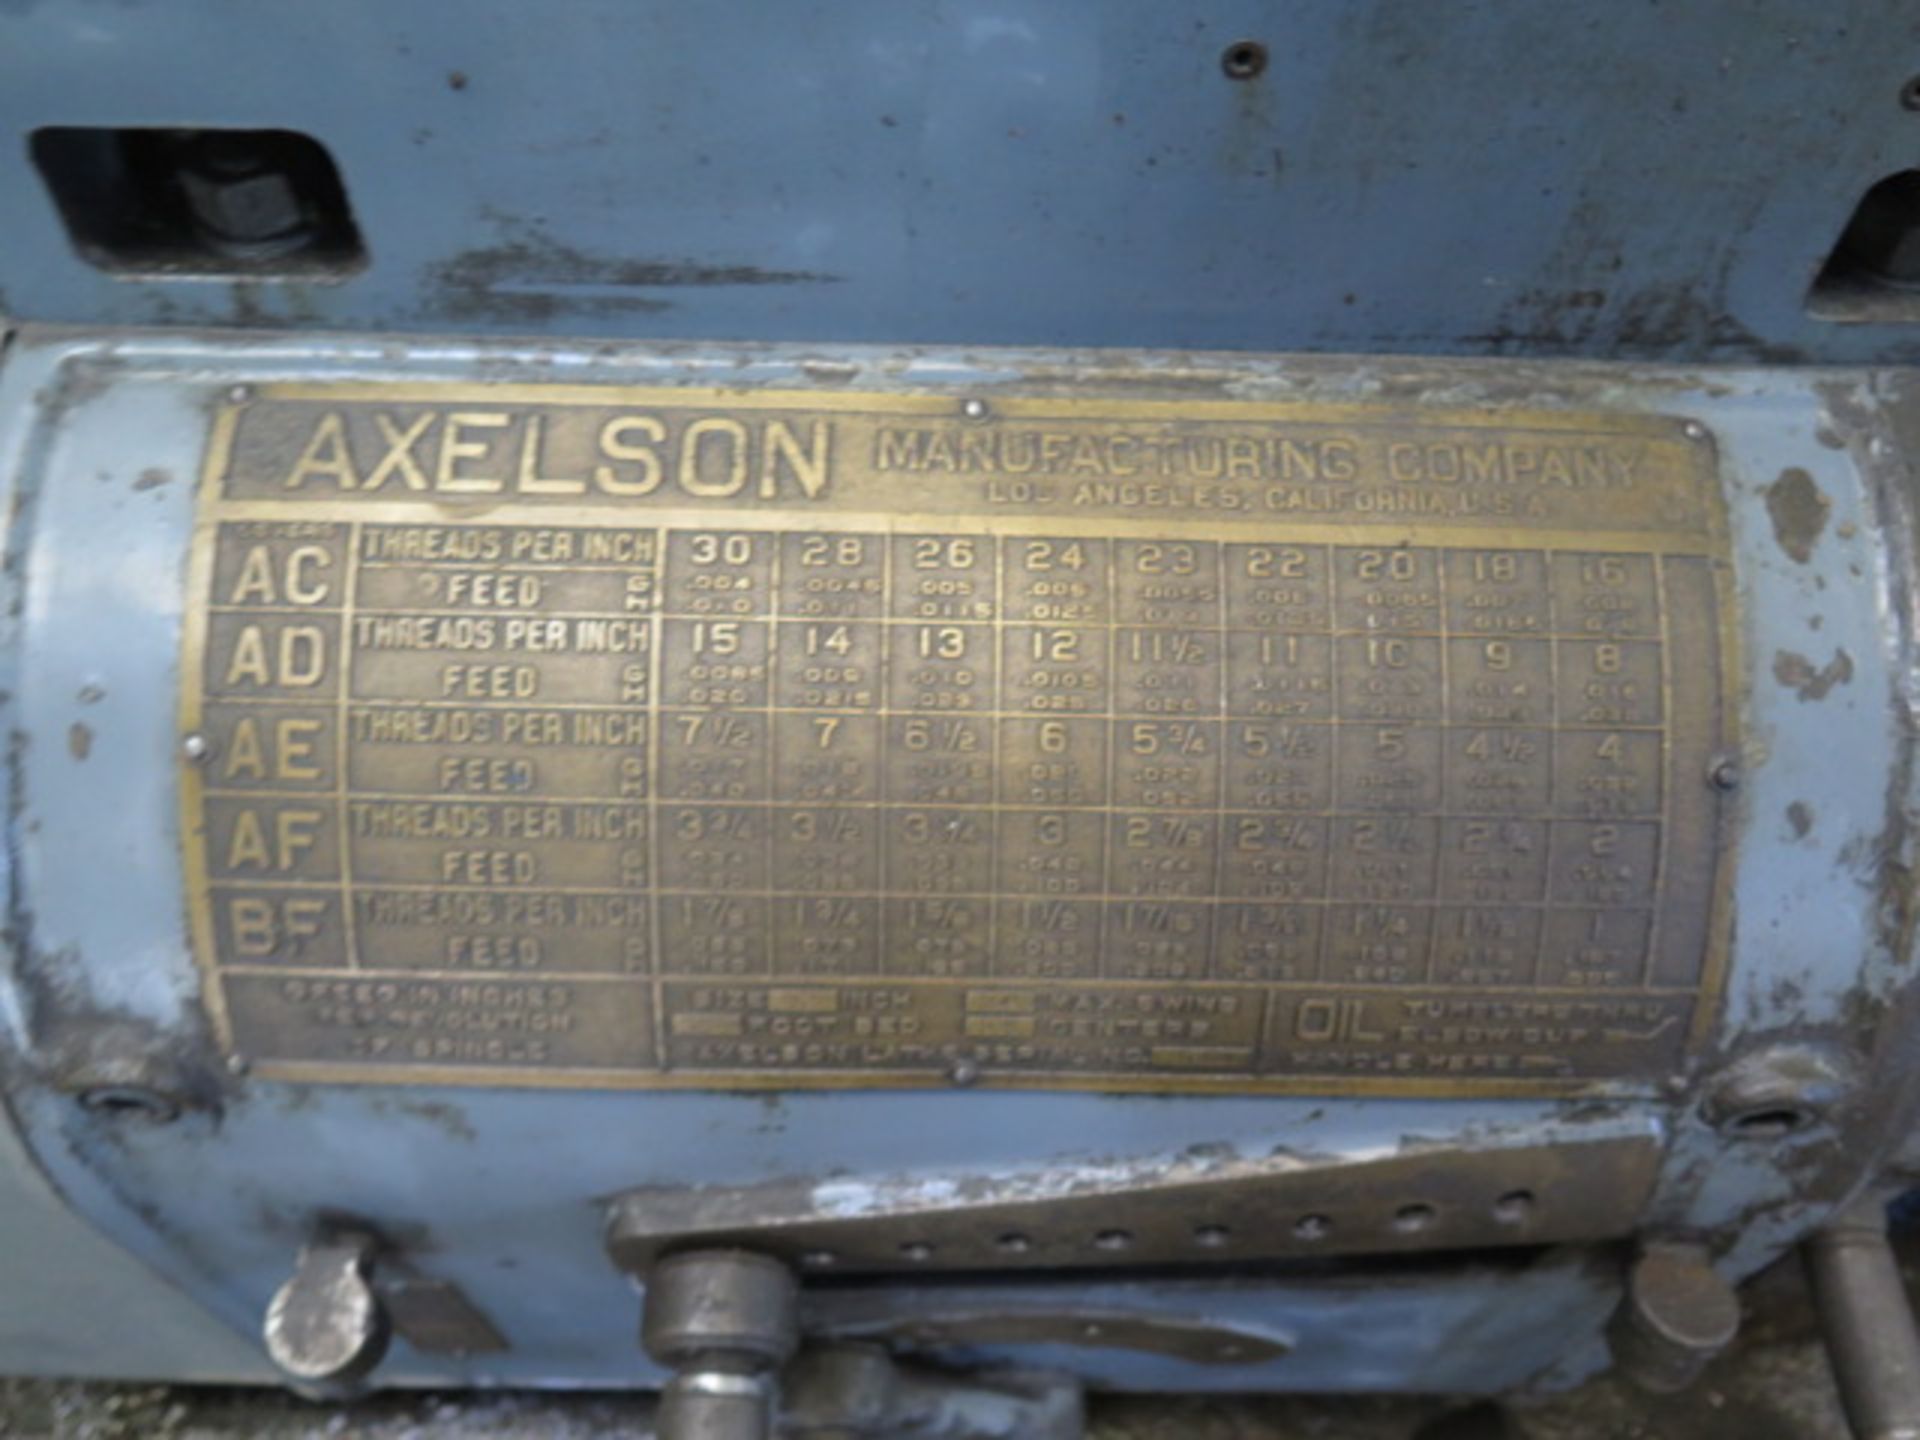 Axelson 32 48” x 168” Geared Head Lathe s/n 1644 w/ 16” Extension, 6-555 RPM, Inch Thrd, SOLD AS IS - Image 12 of 21